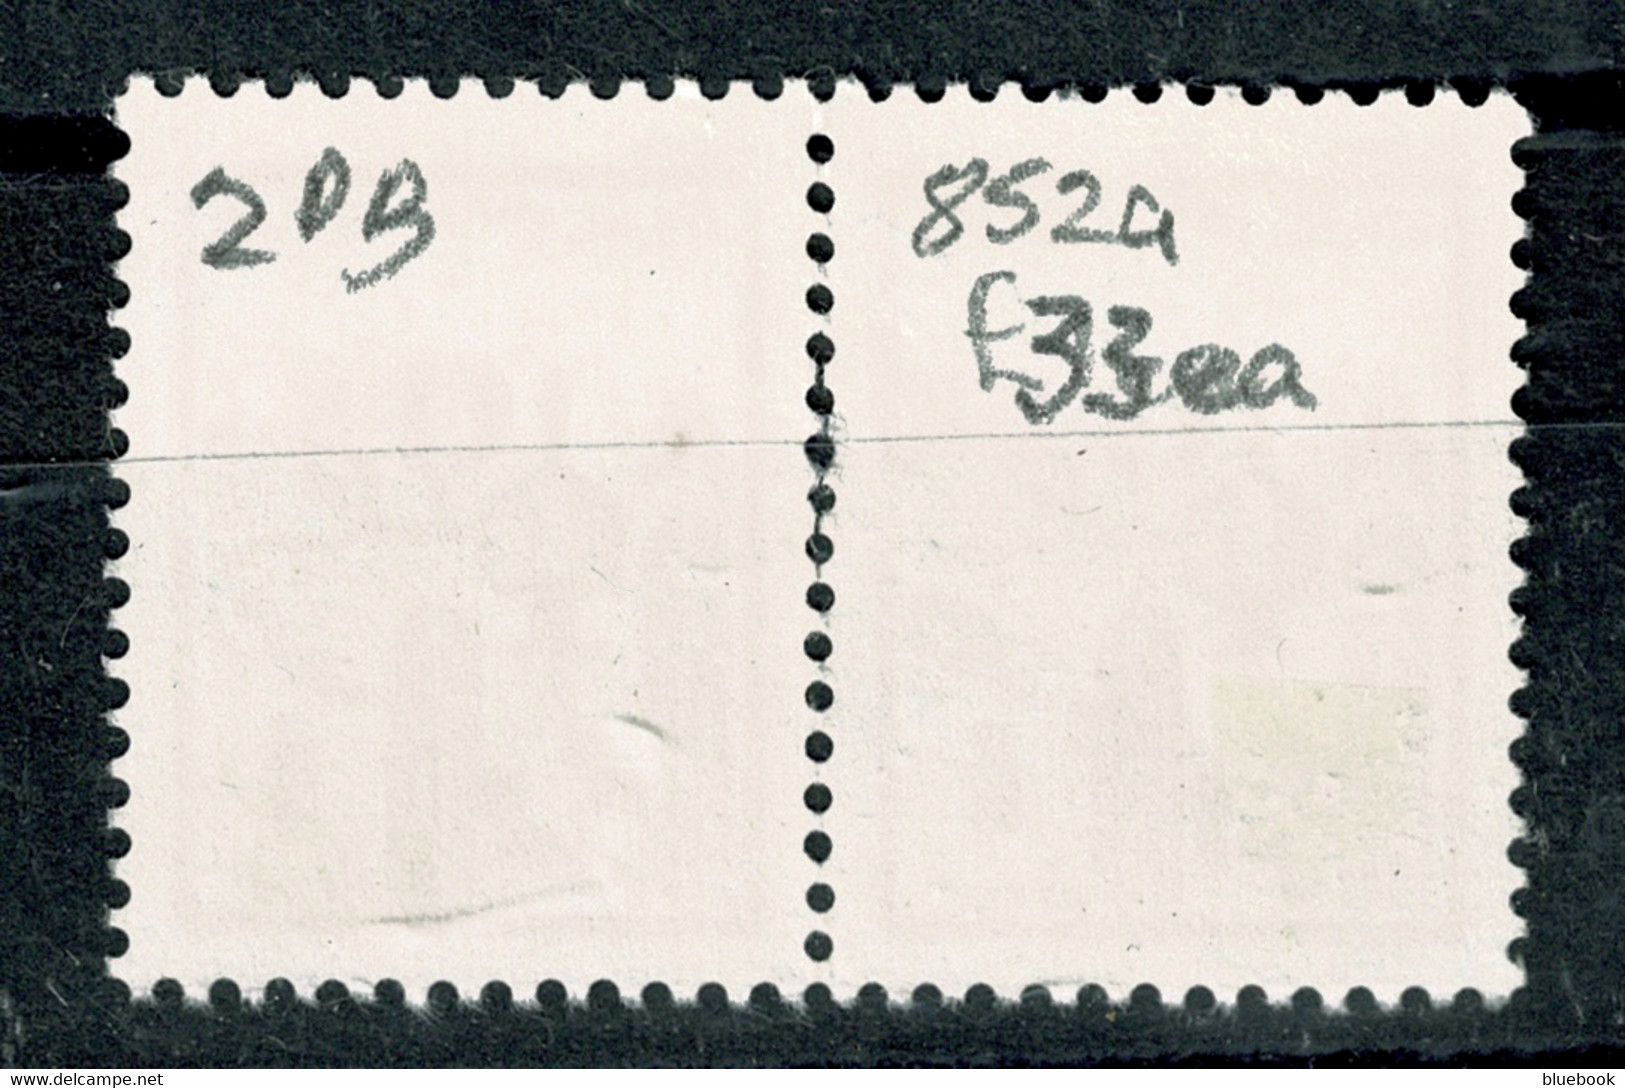 Ref 1577 - Israel 1982 500s Stamps Pair With Phosphor Bands SG 852a - Used Stamps (with Tabs)